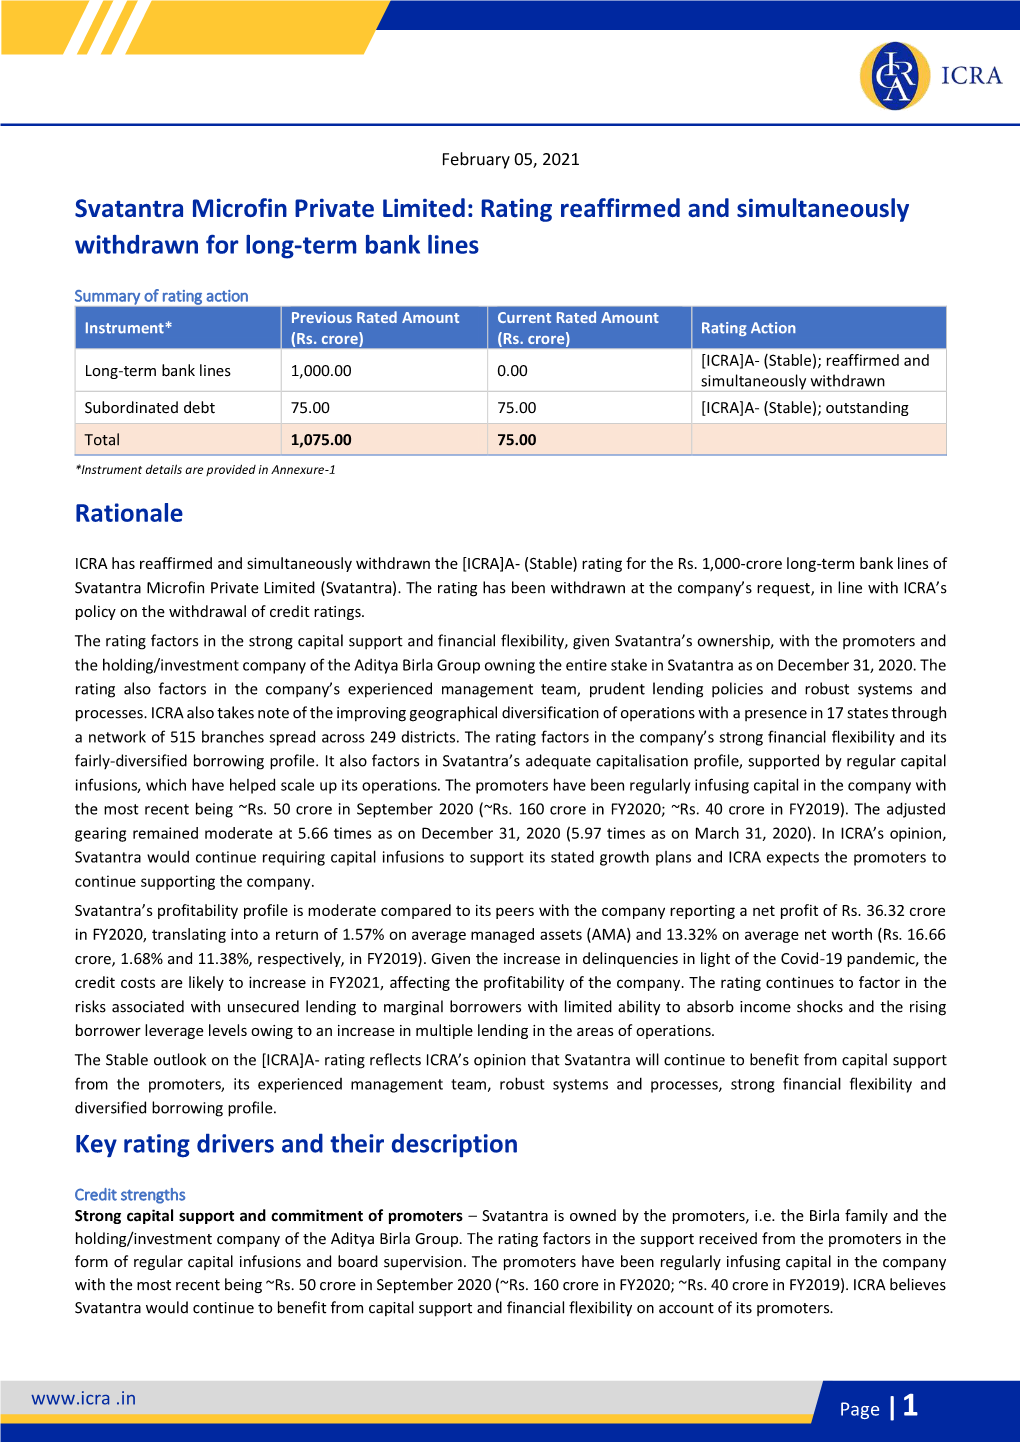 Svatantra Microfin Private Limited: Rating Reaffirmed and Simultaneously Withdrawn for Long-Term Bank Lines